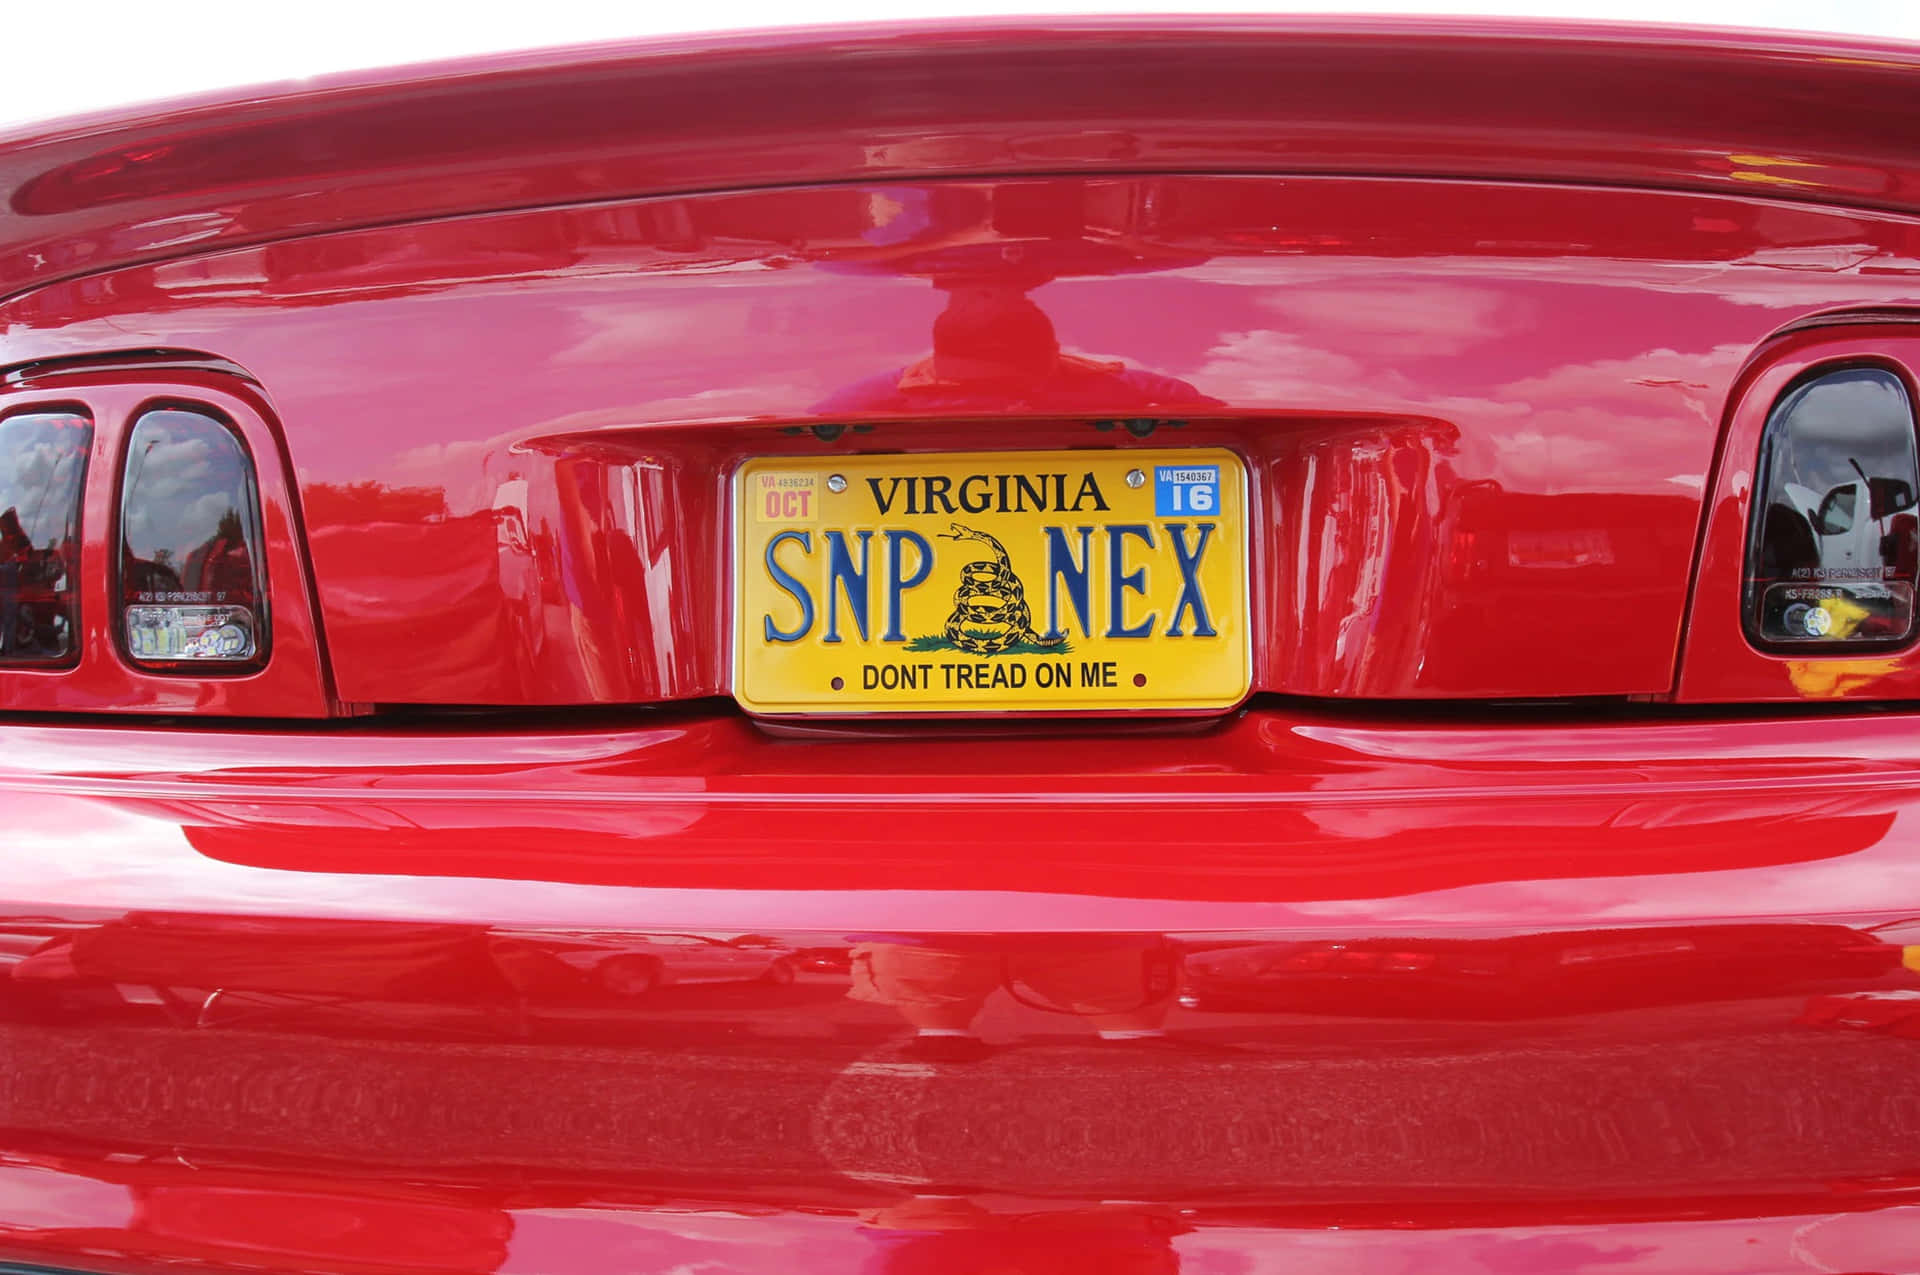 Caption: Close-Up Image of a Car License Plate Wallpaper